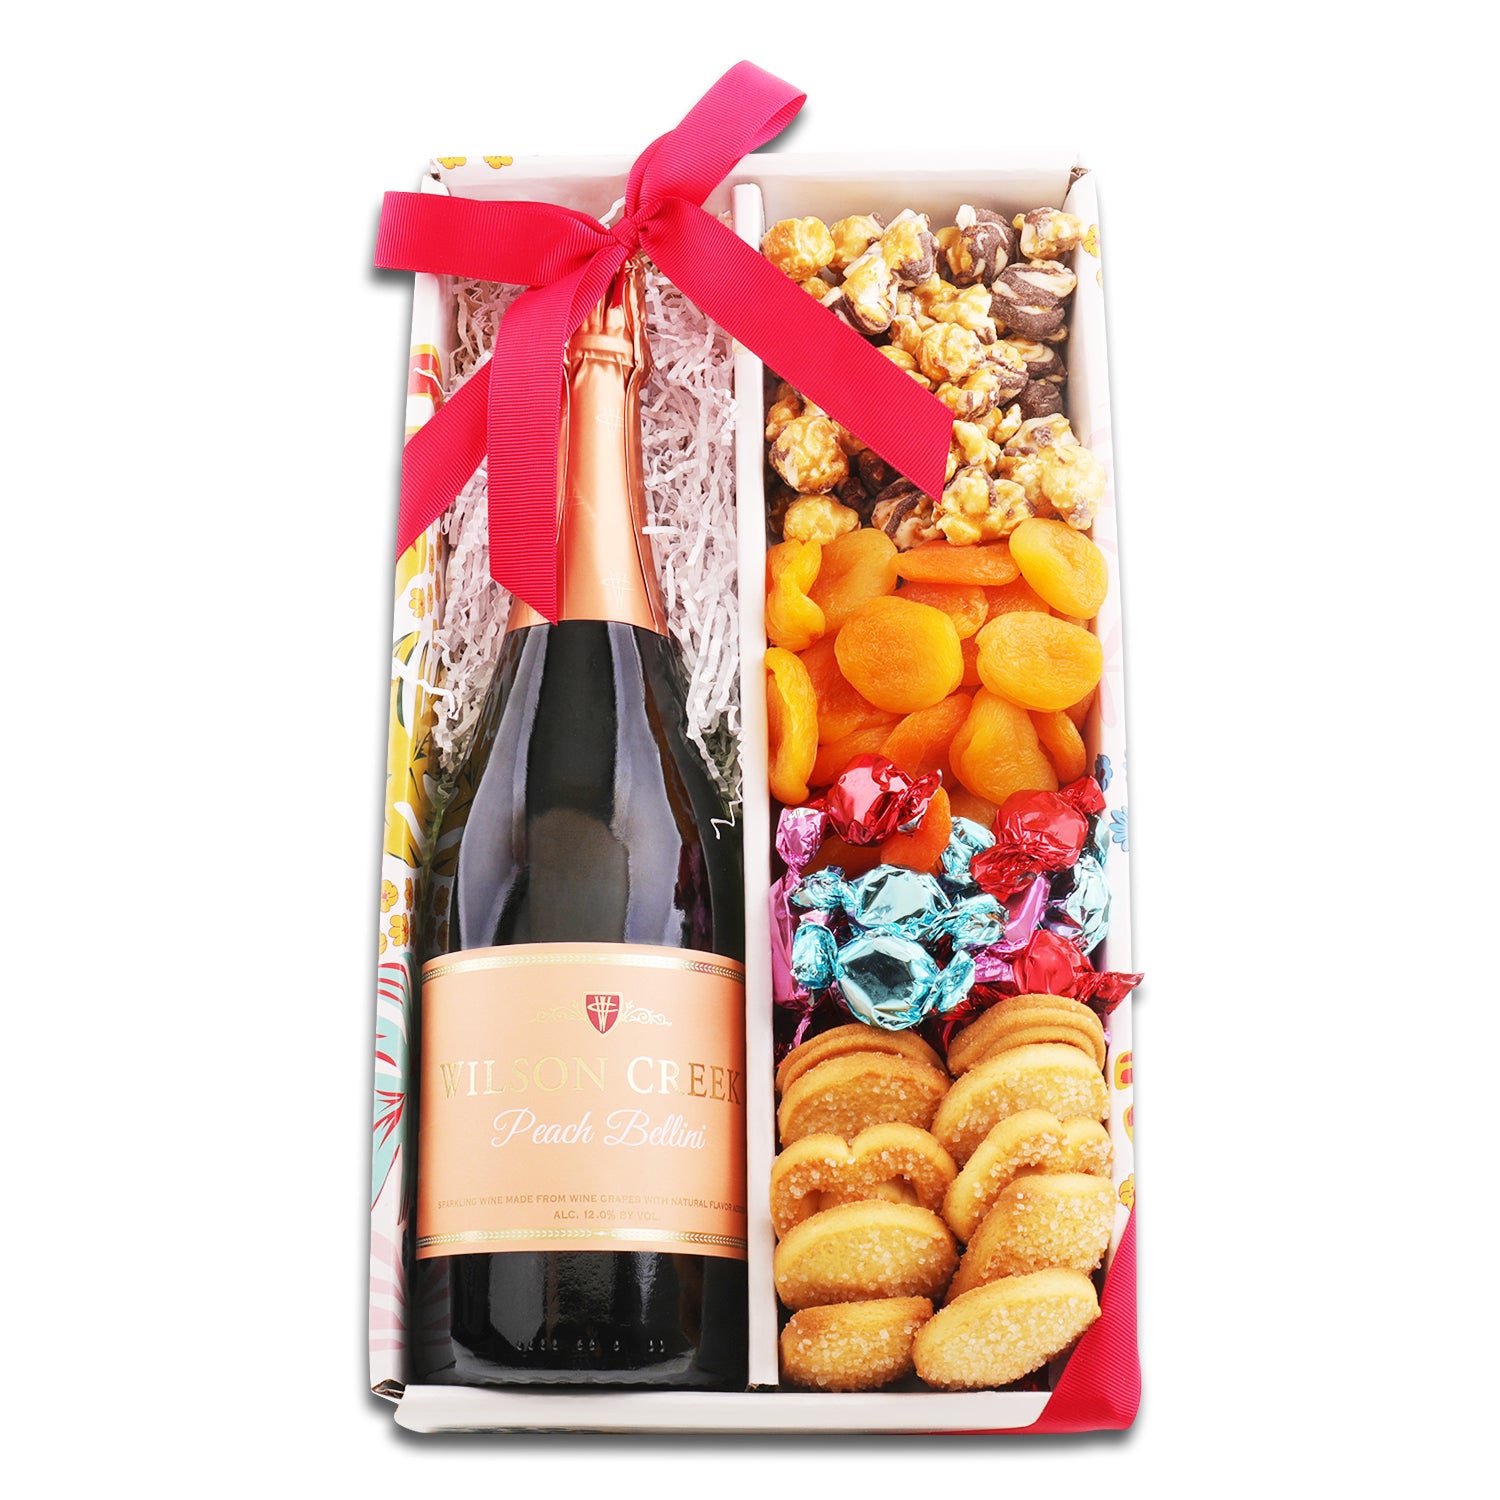 Wilson Creek Peach Belini wine delicately dried apricots, chocolate drizzled caramel popcorn, butter cookies, and sweet hard candies. 